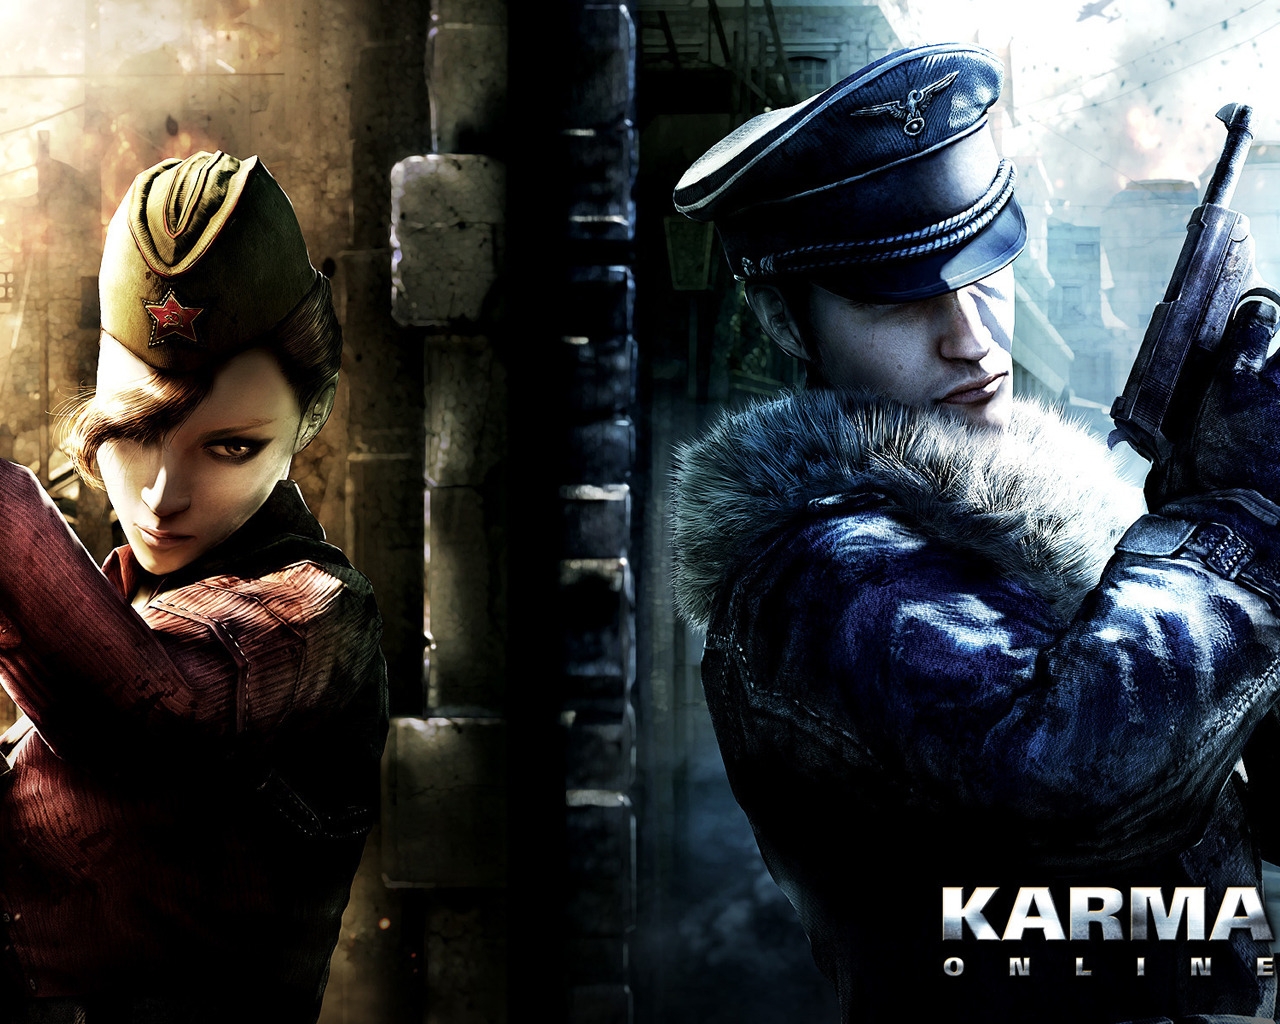 Karma Online Poster for 1280 x 1024 resolution